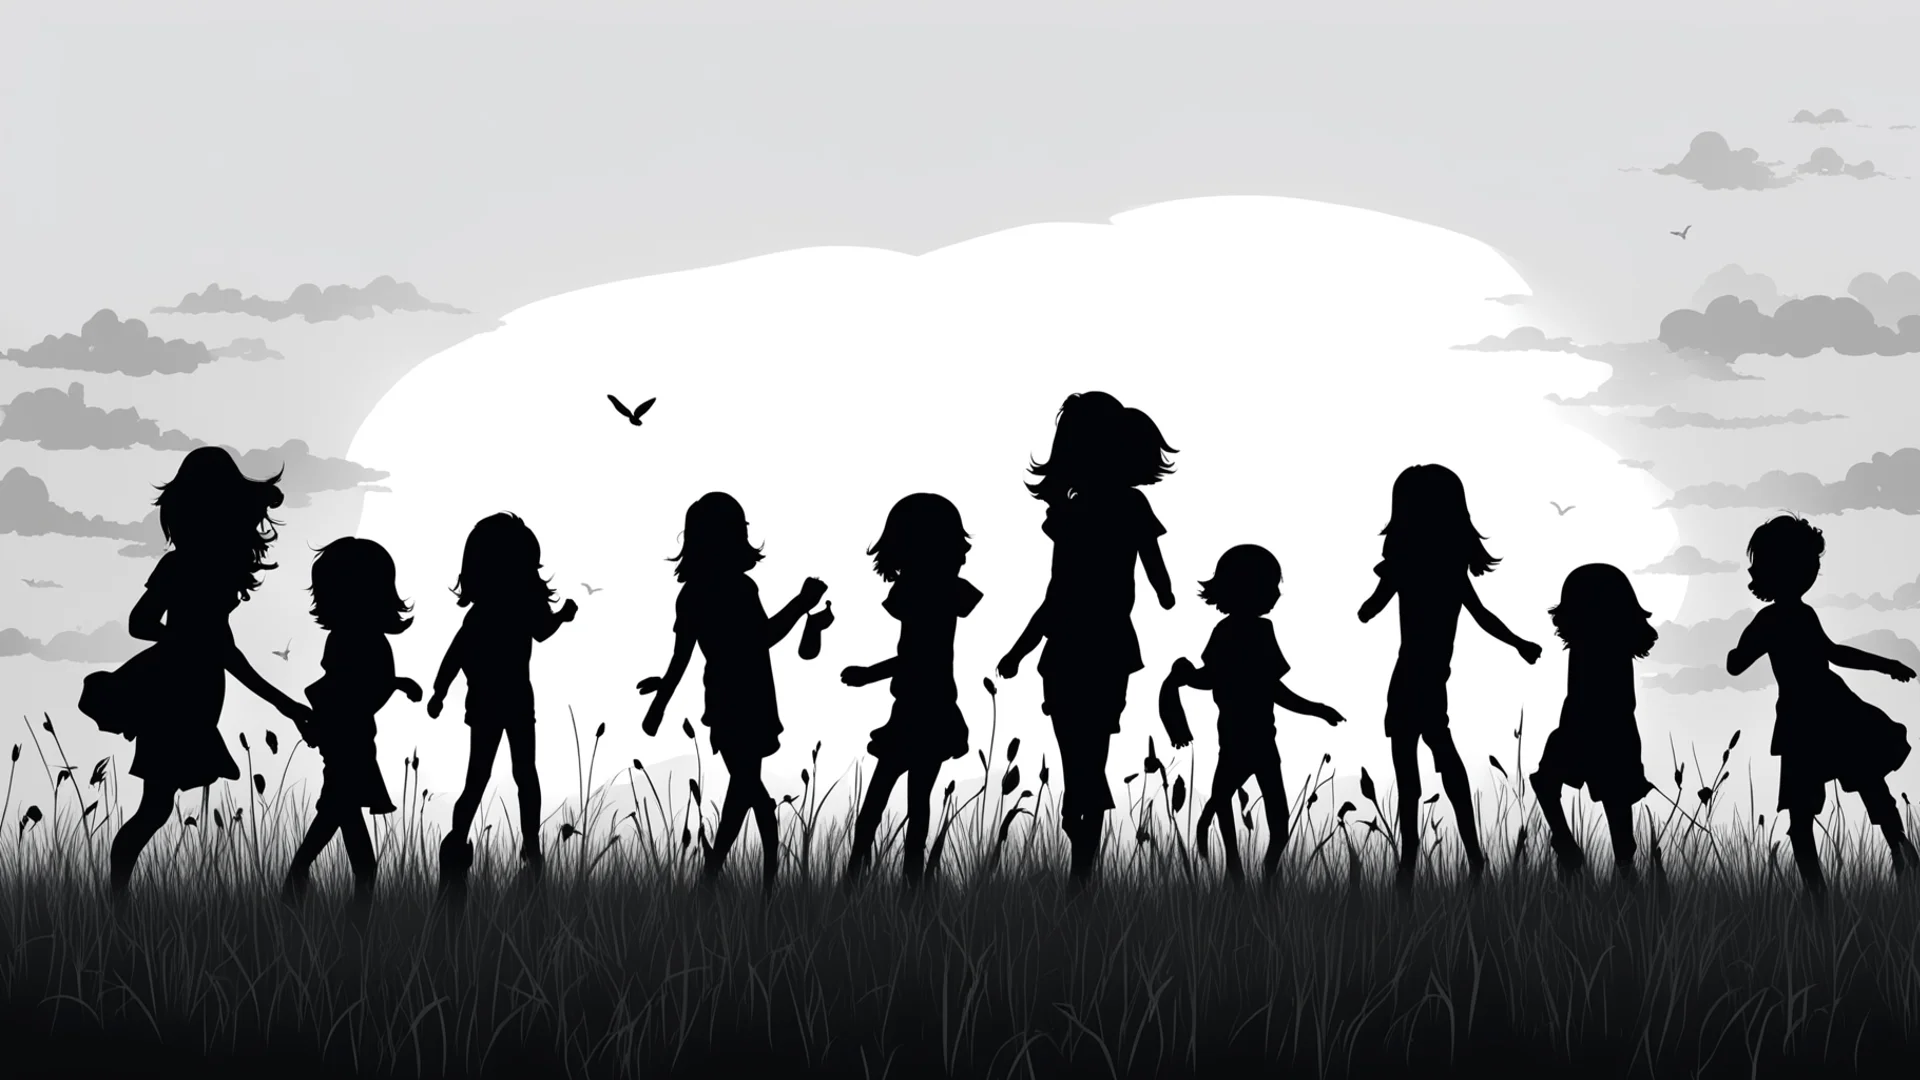 draw a silhouette of a group of boys and girls playing in a field amazing awesome portrait 2 wide